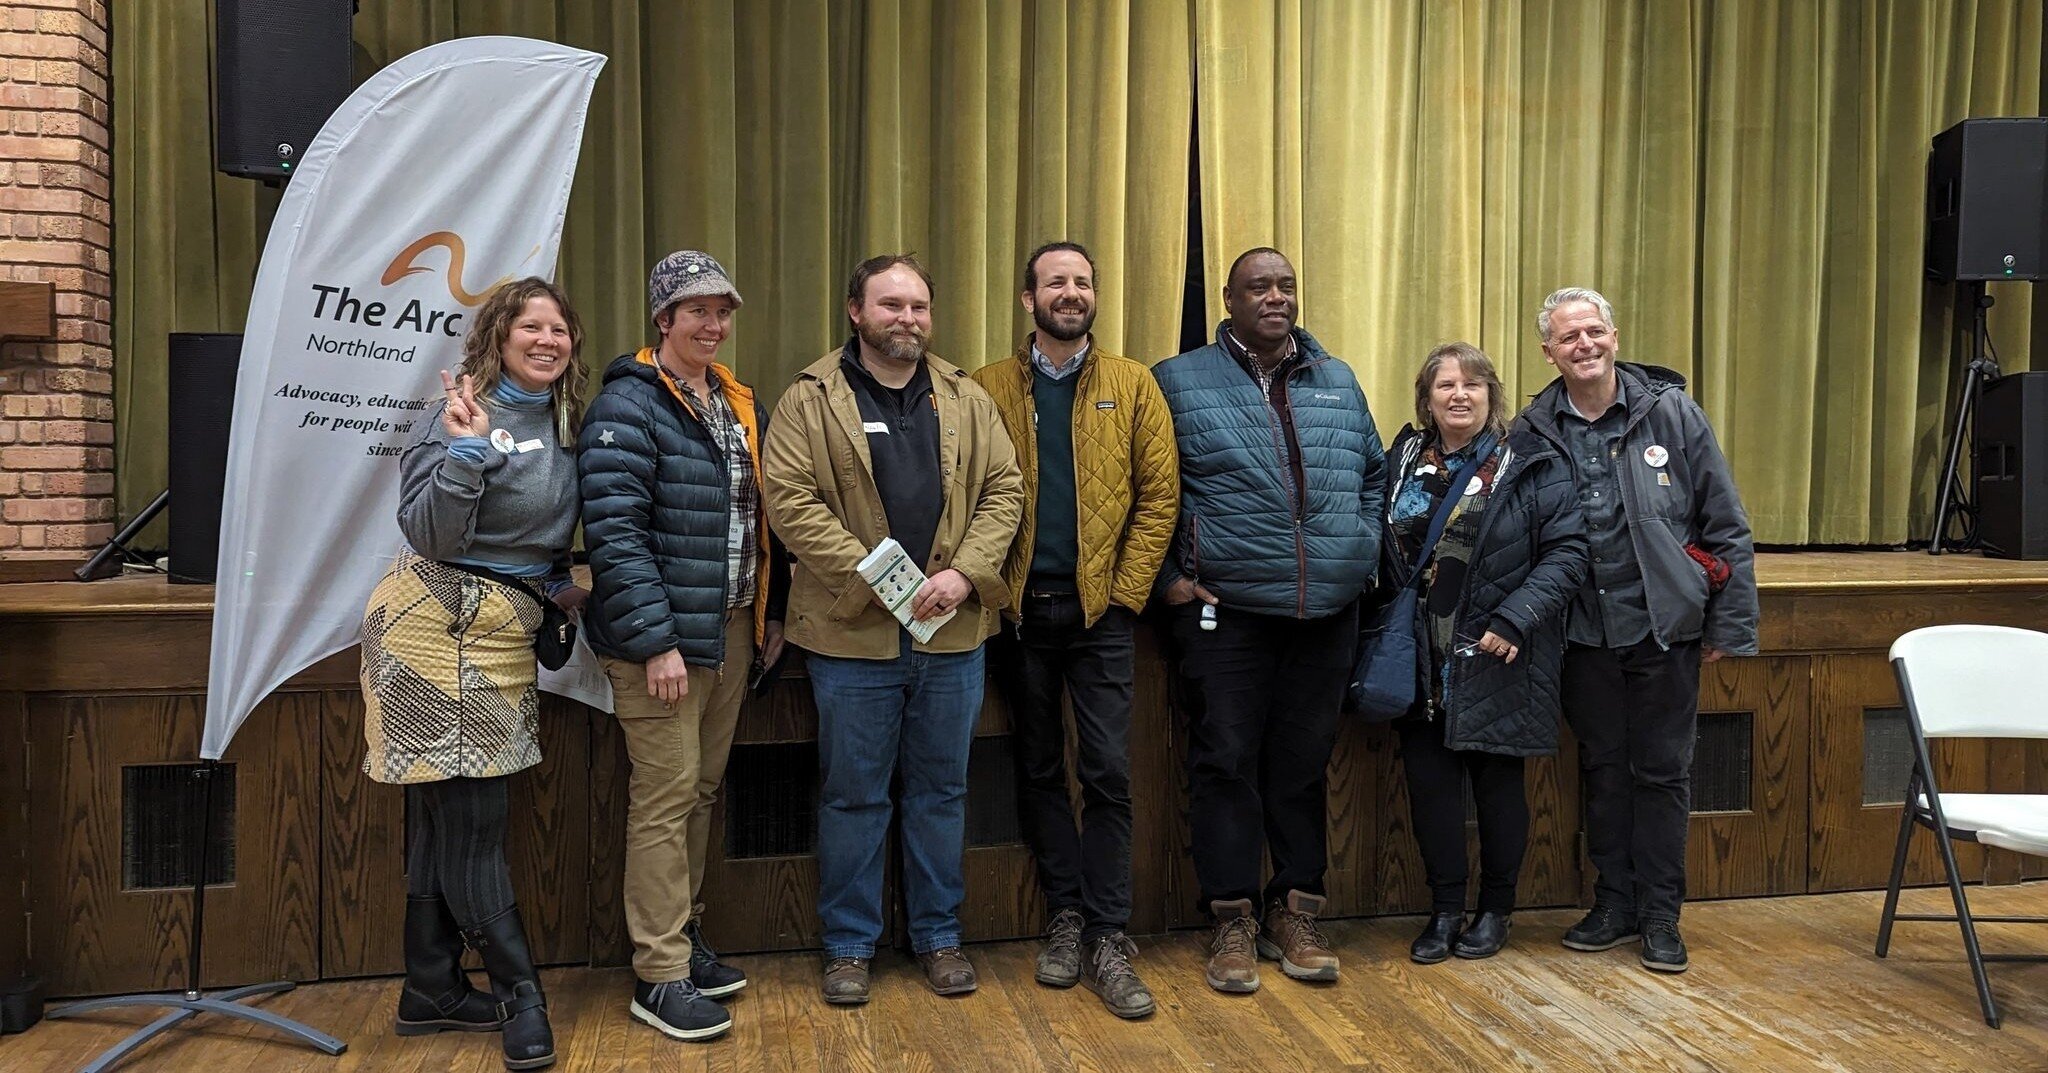 We were proud to be a small part of the Duluth Housing Town Hall. Thank you to @ourhomesmn, @liishkozlowski, @jenmcewenmn, and all of the community leaders and speakers for expressing the importance of sustainable and predictable funding for our neig